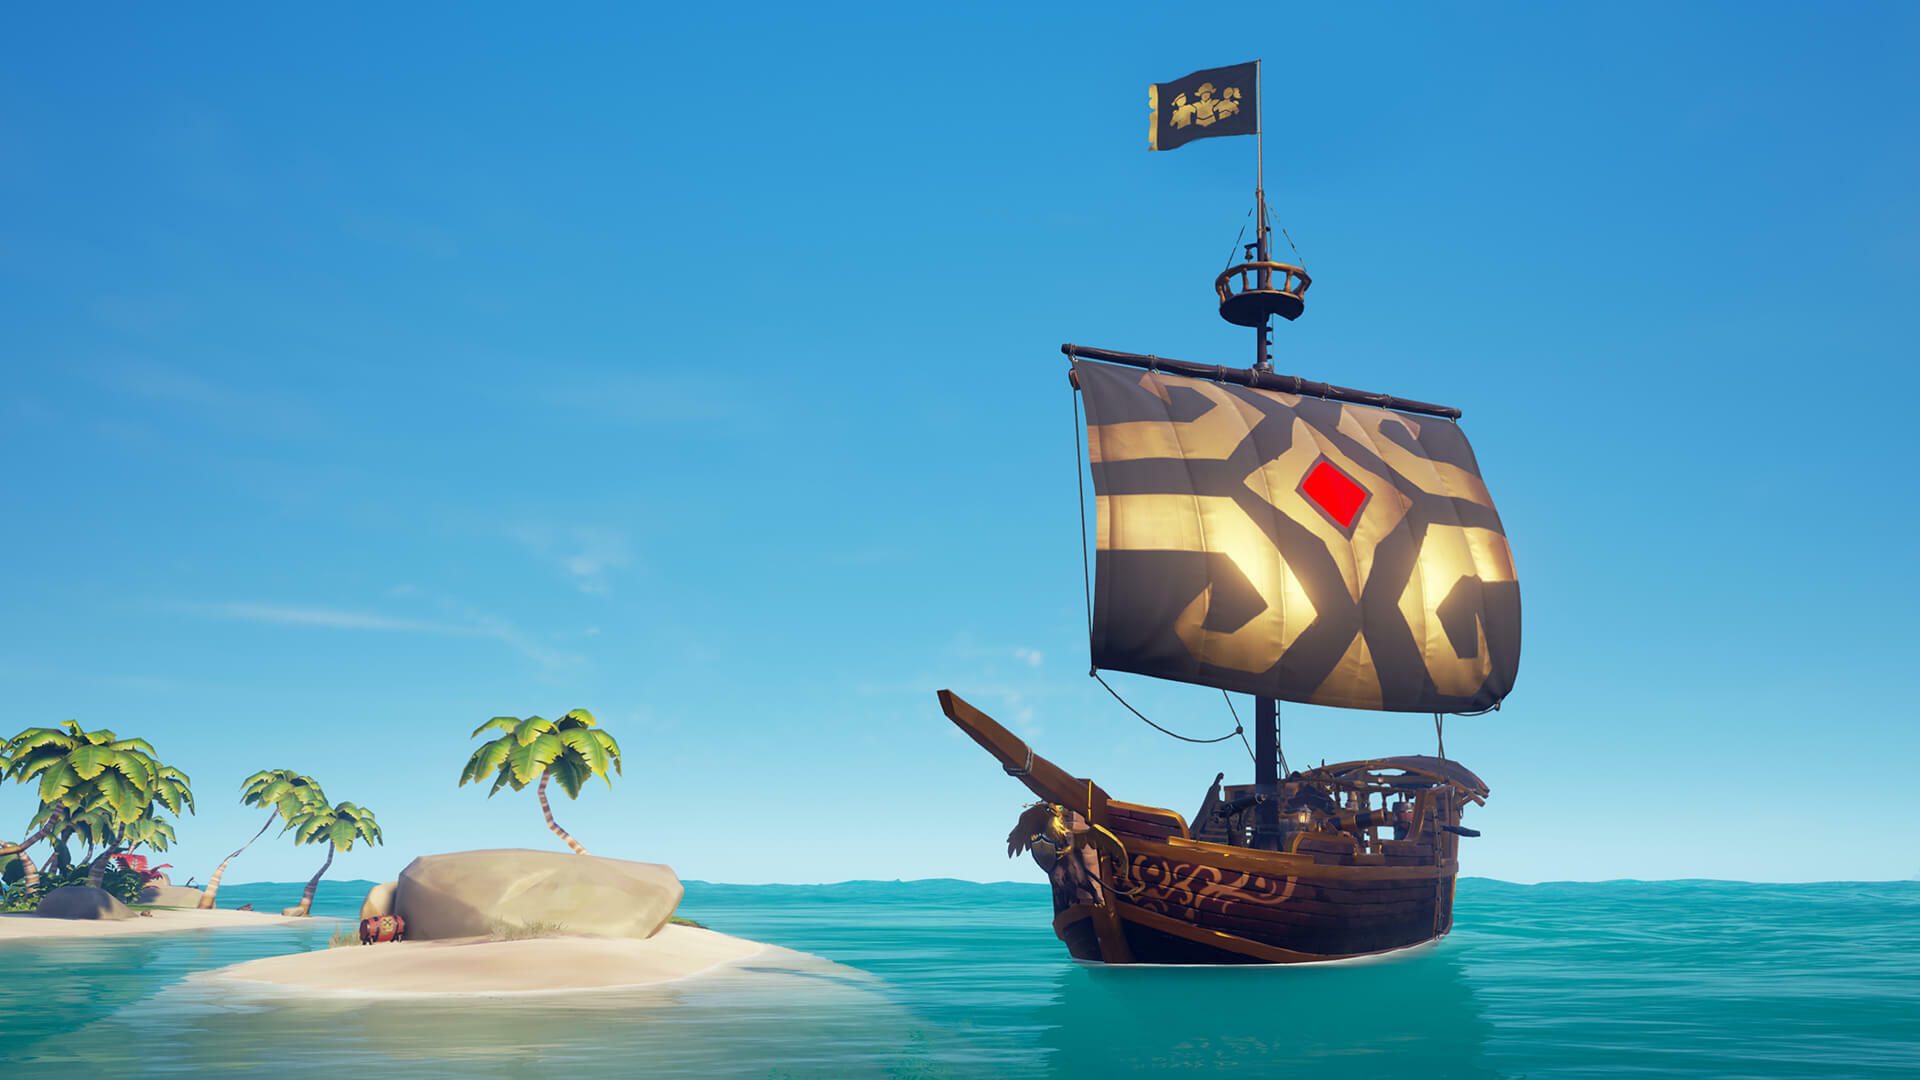 Skull & Bones sends you to sea on pirate ships with ultimate abilities